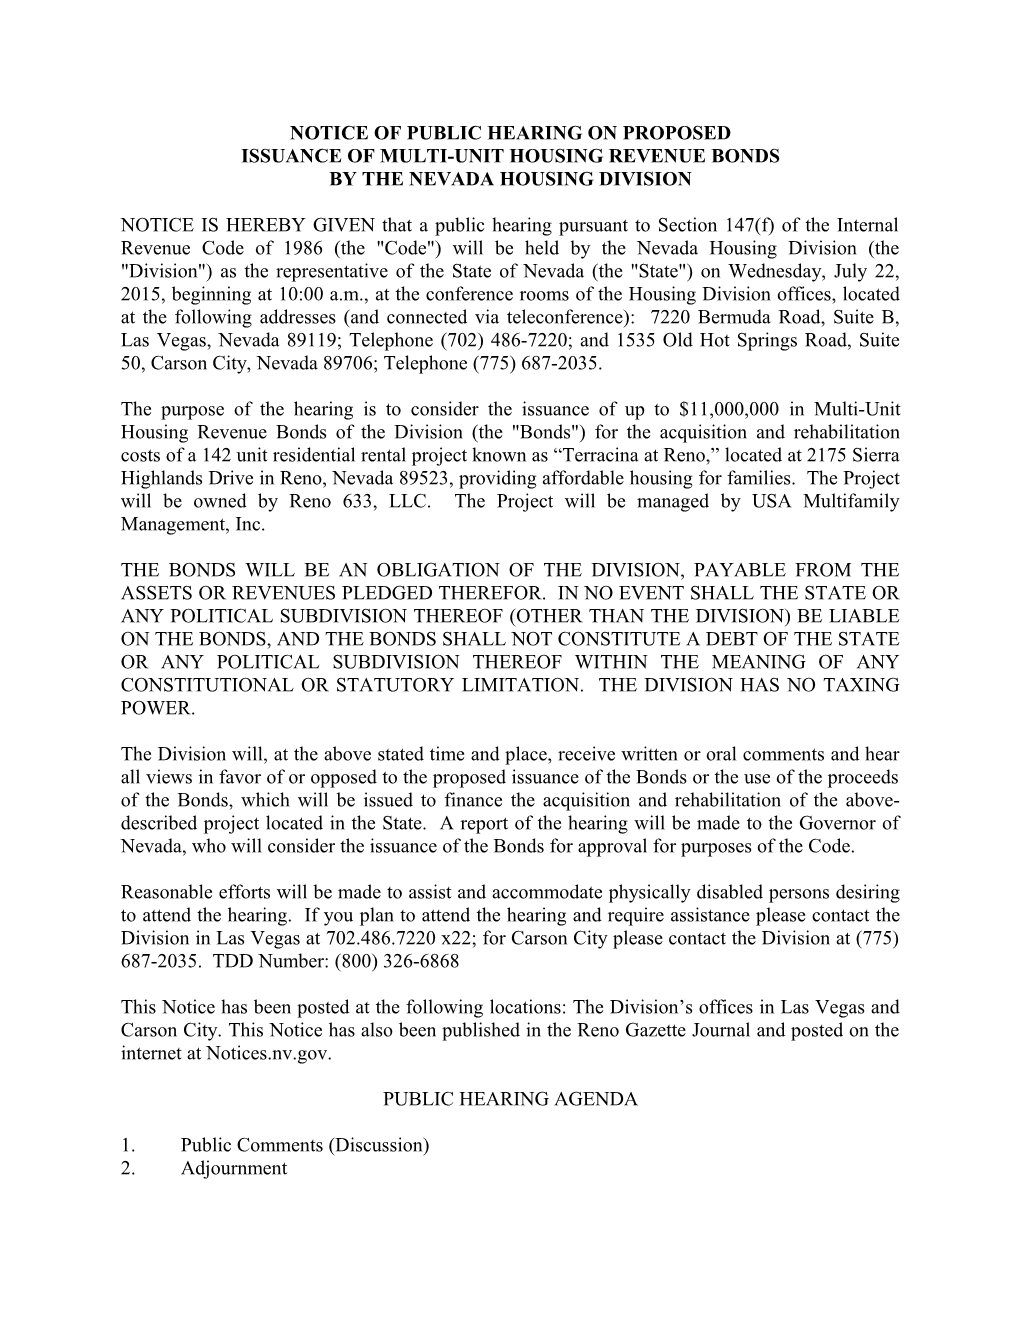 Notice of Public Hearing on Proposed